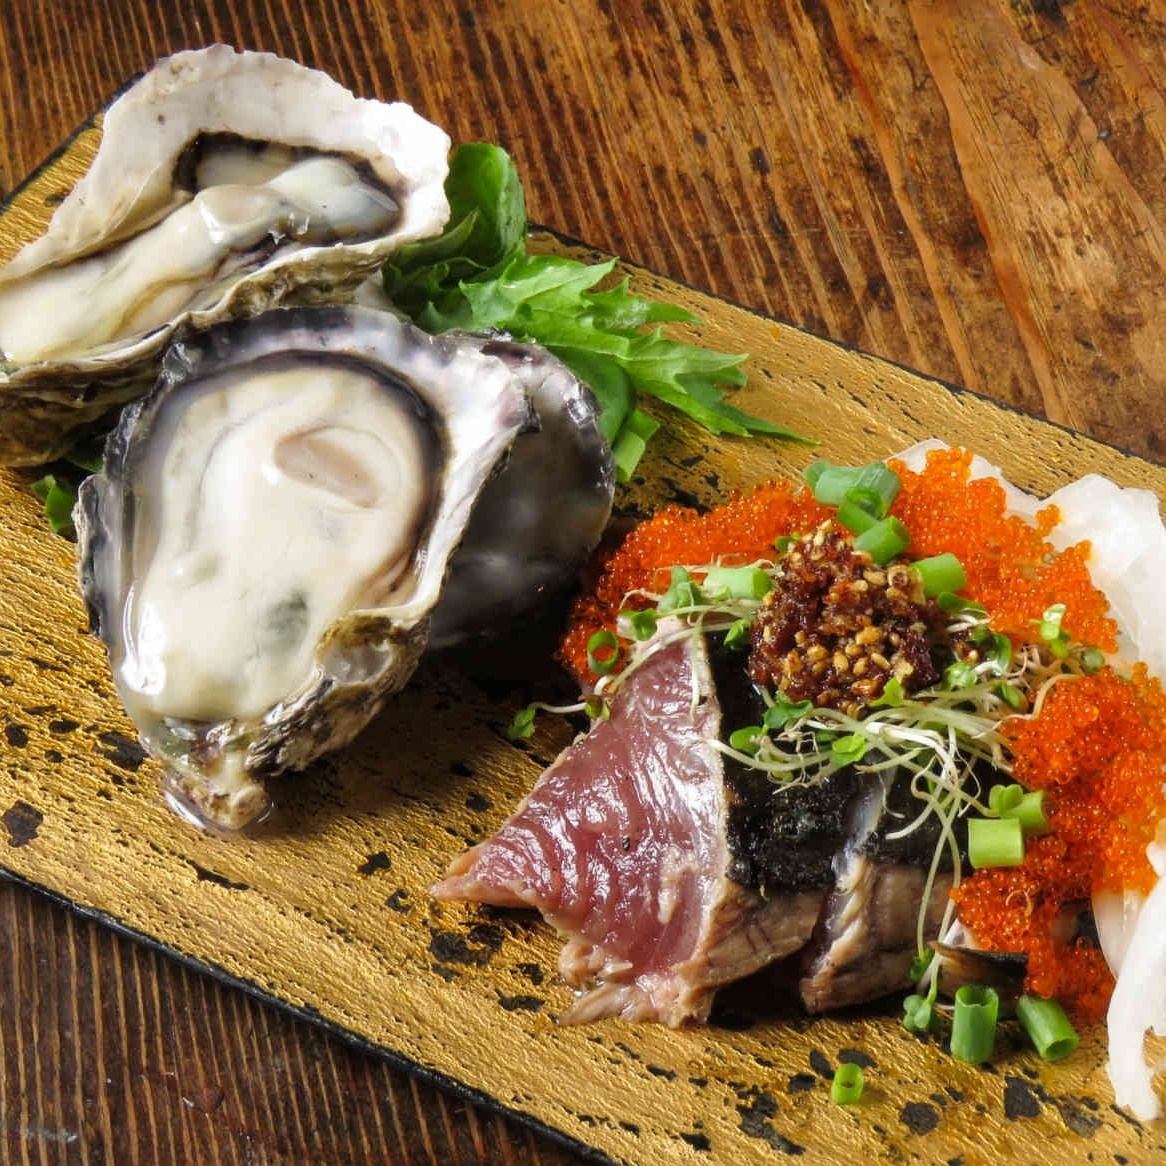 Our shop's specialty! Enjoy bonito directly delivered from Toyosu Market and fresh oysters from Hyogo Prefecture!